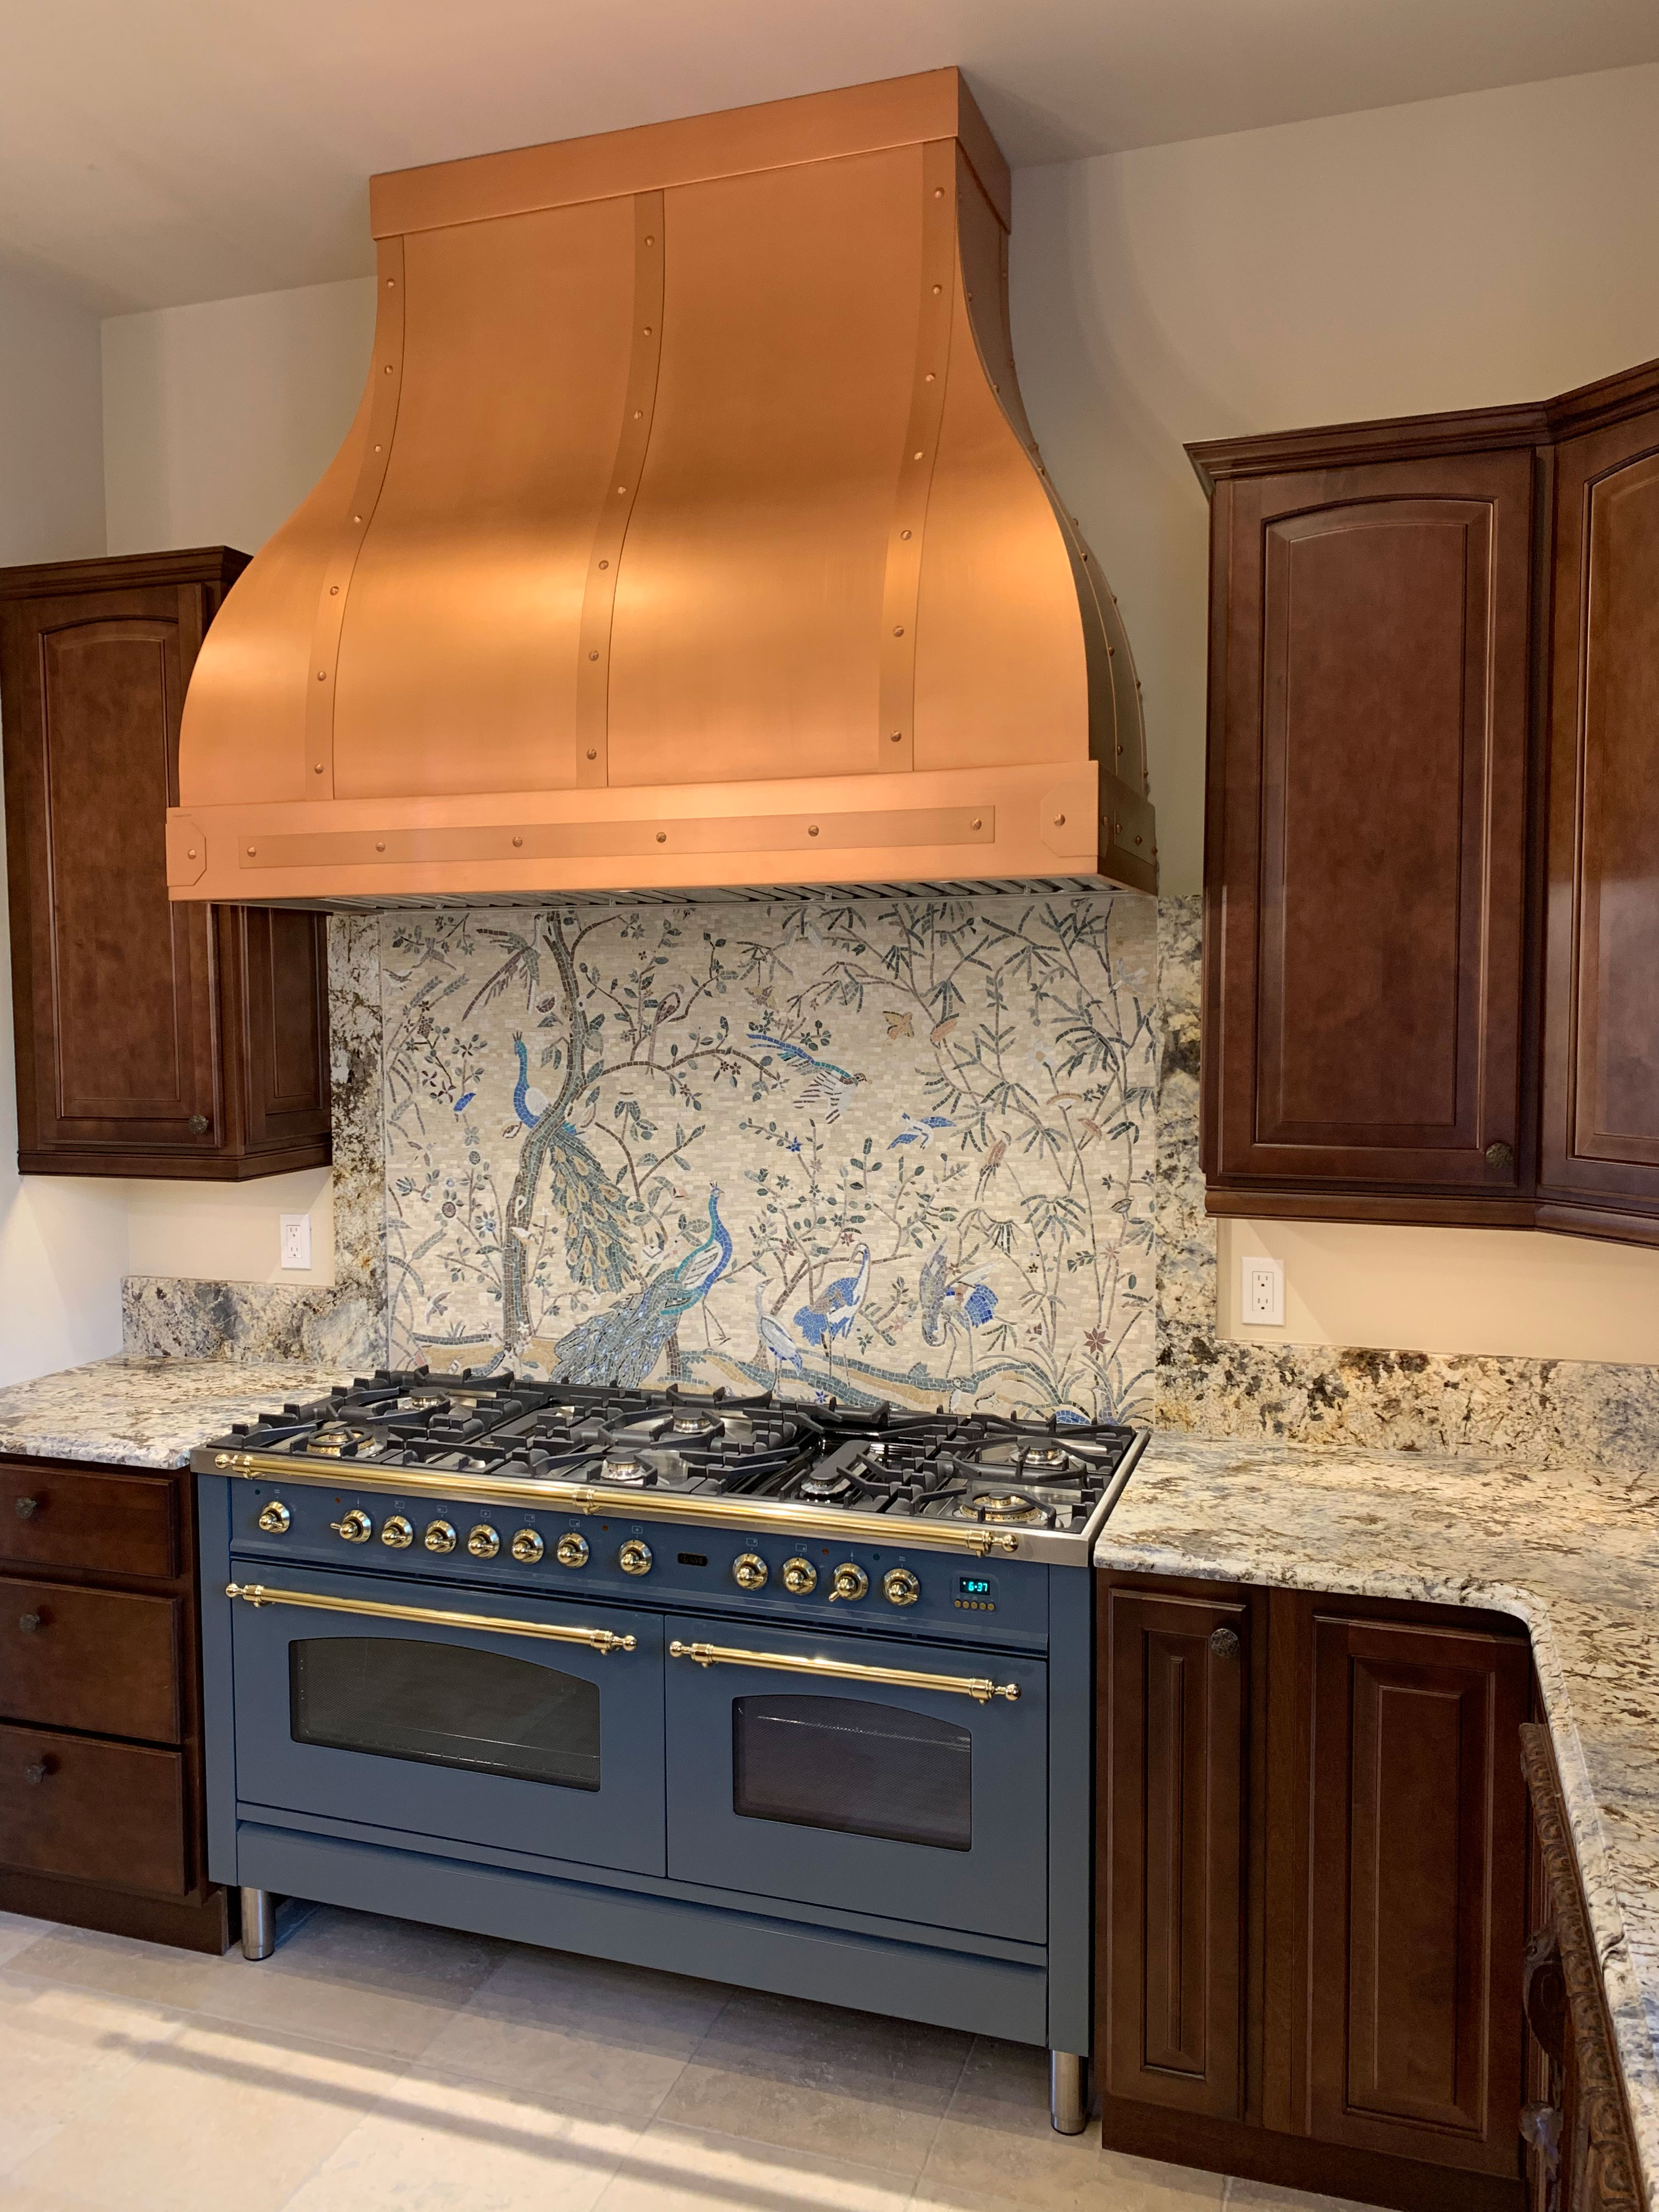 Copper range hood perfectly complement the exquisite tuscan kitchen gallery with brown kitchen cabinets